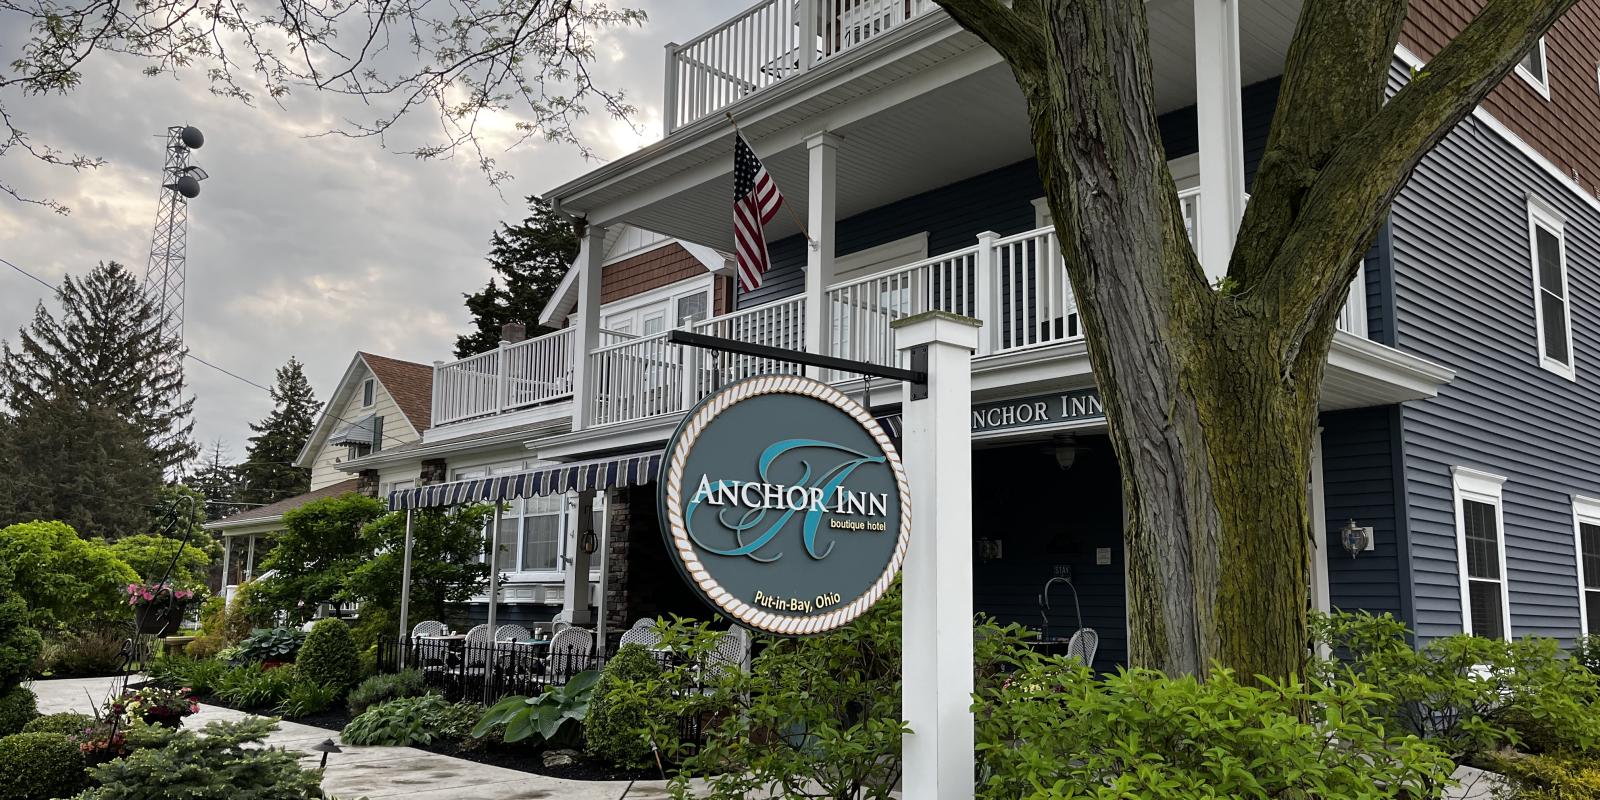 Outside view of the Anchor Inn Boutique Hotel